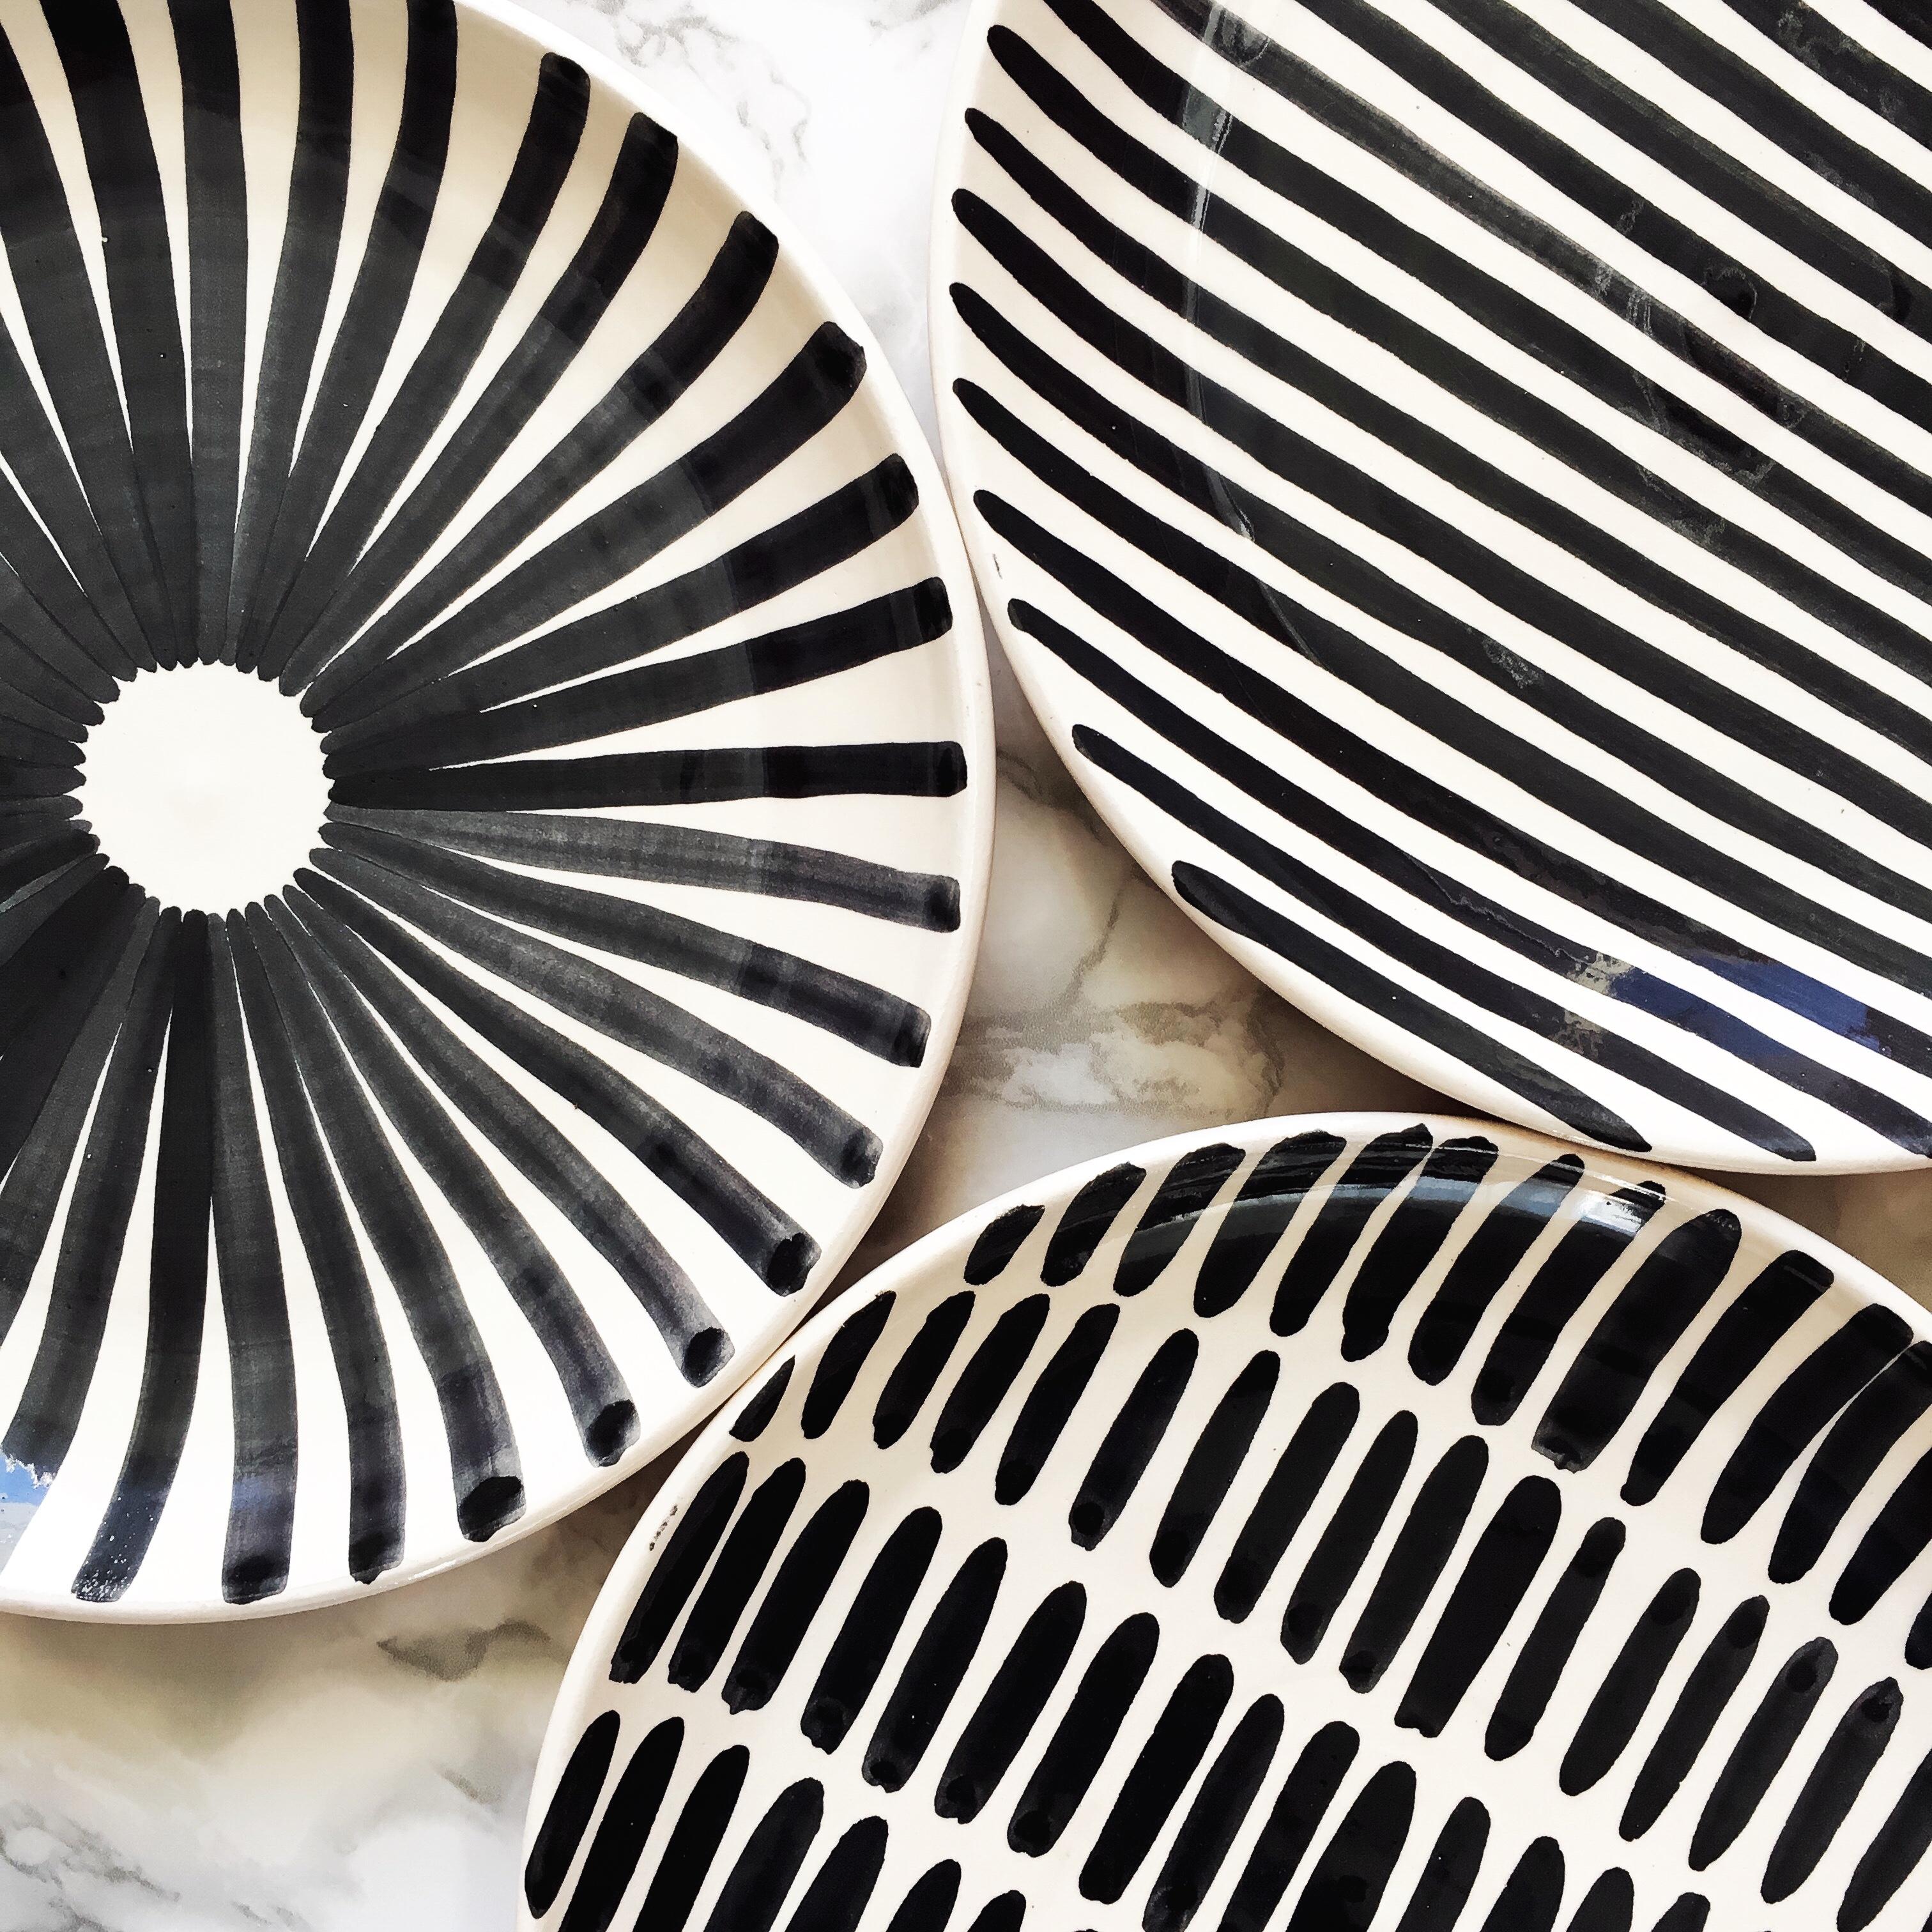 Portuguese Handmade Black and White Ceramic Dash Pattern Salad Plates, in Stock For Sale